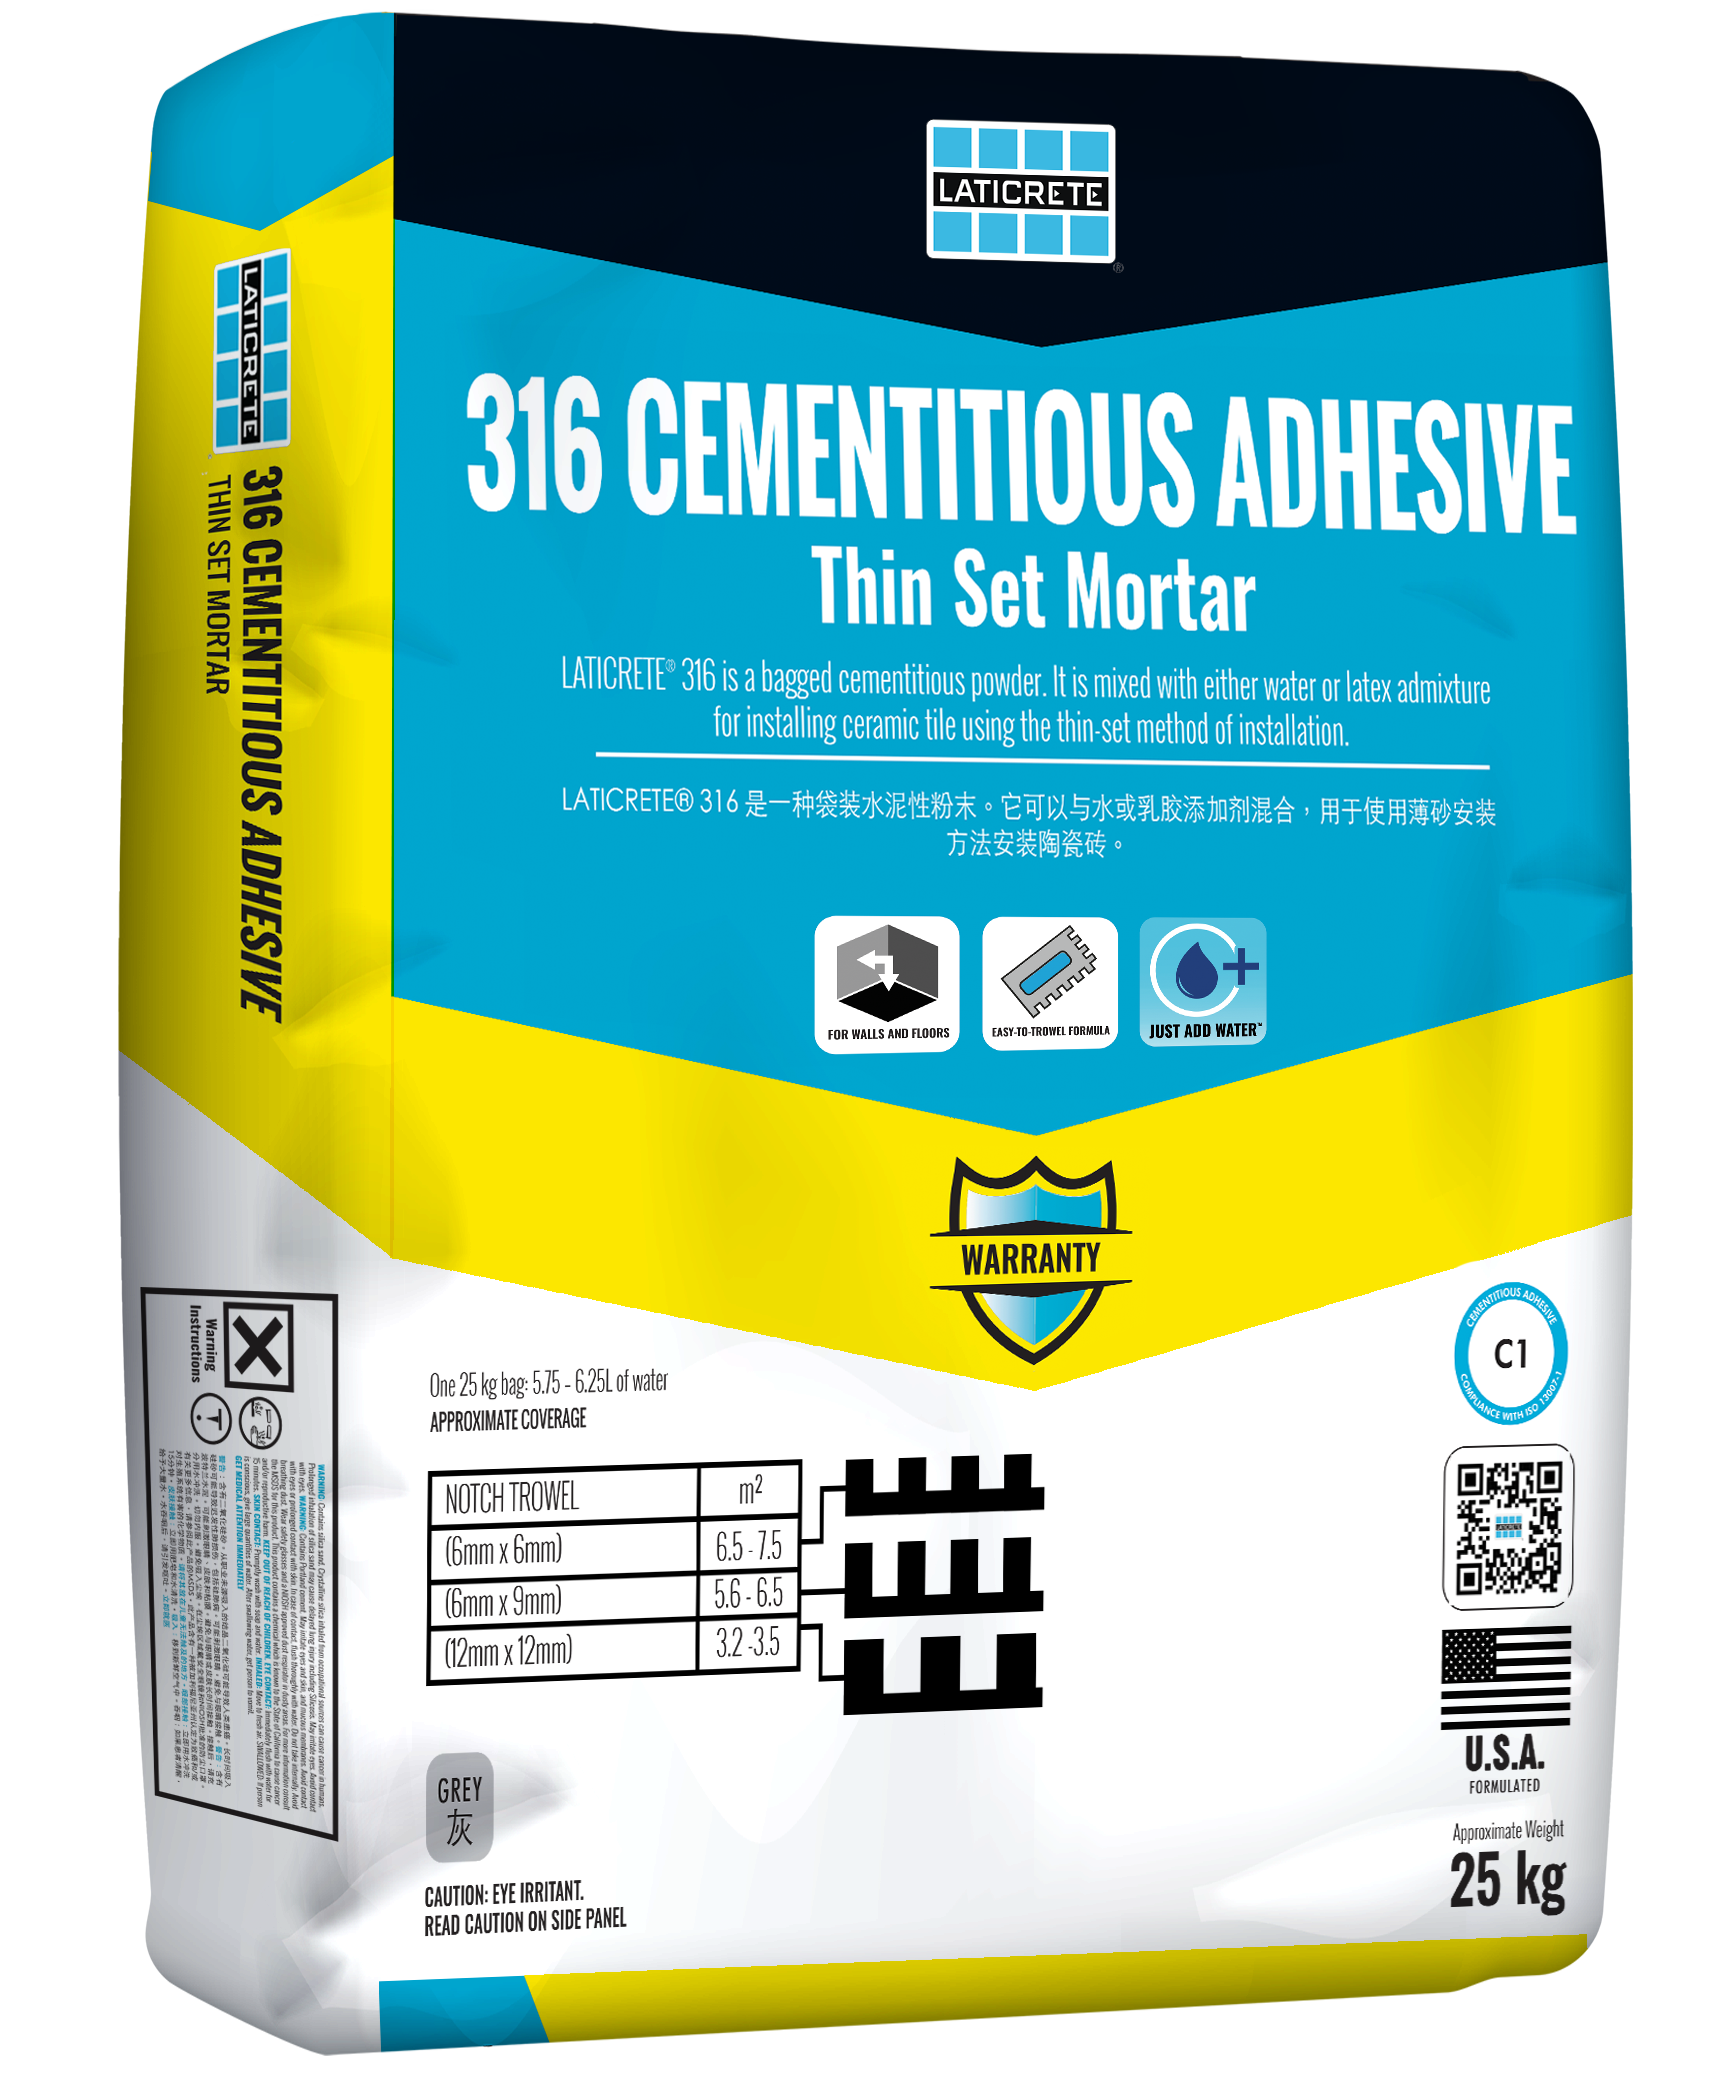 316 Cementitious Adhesive 